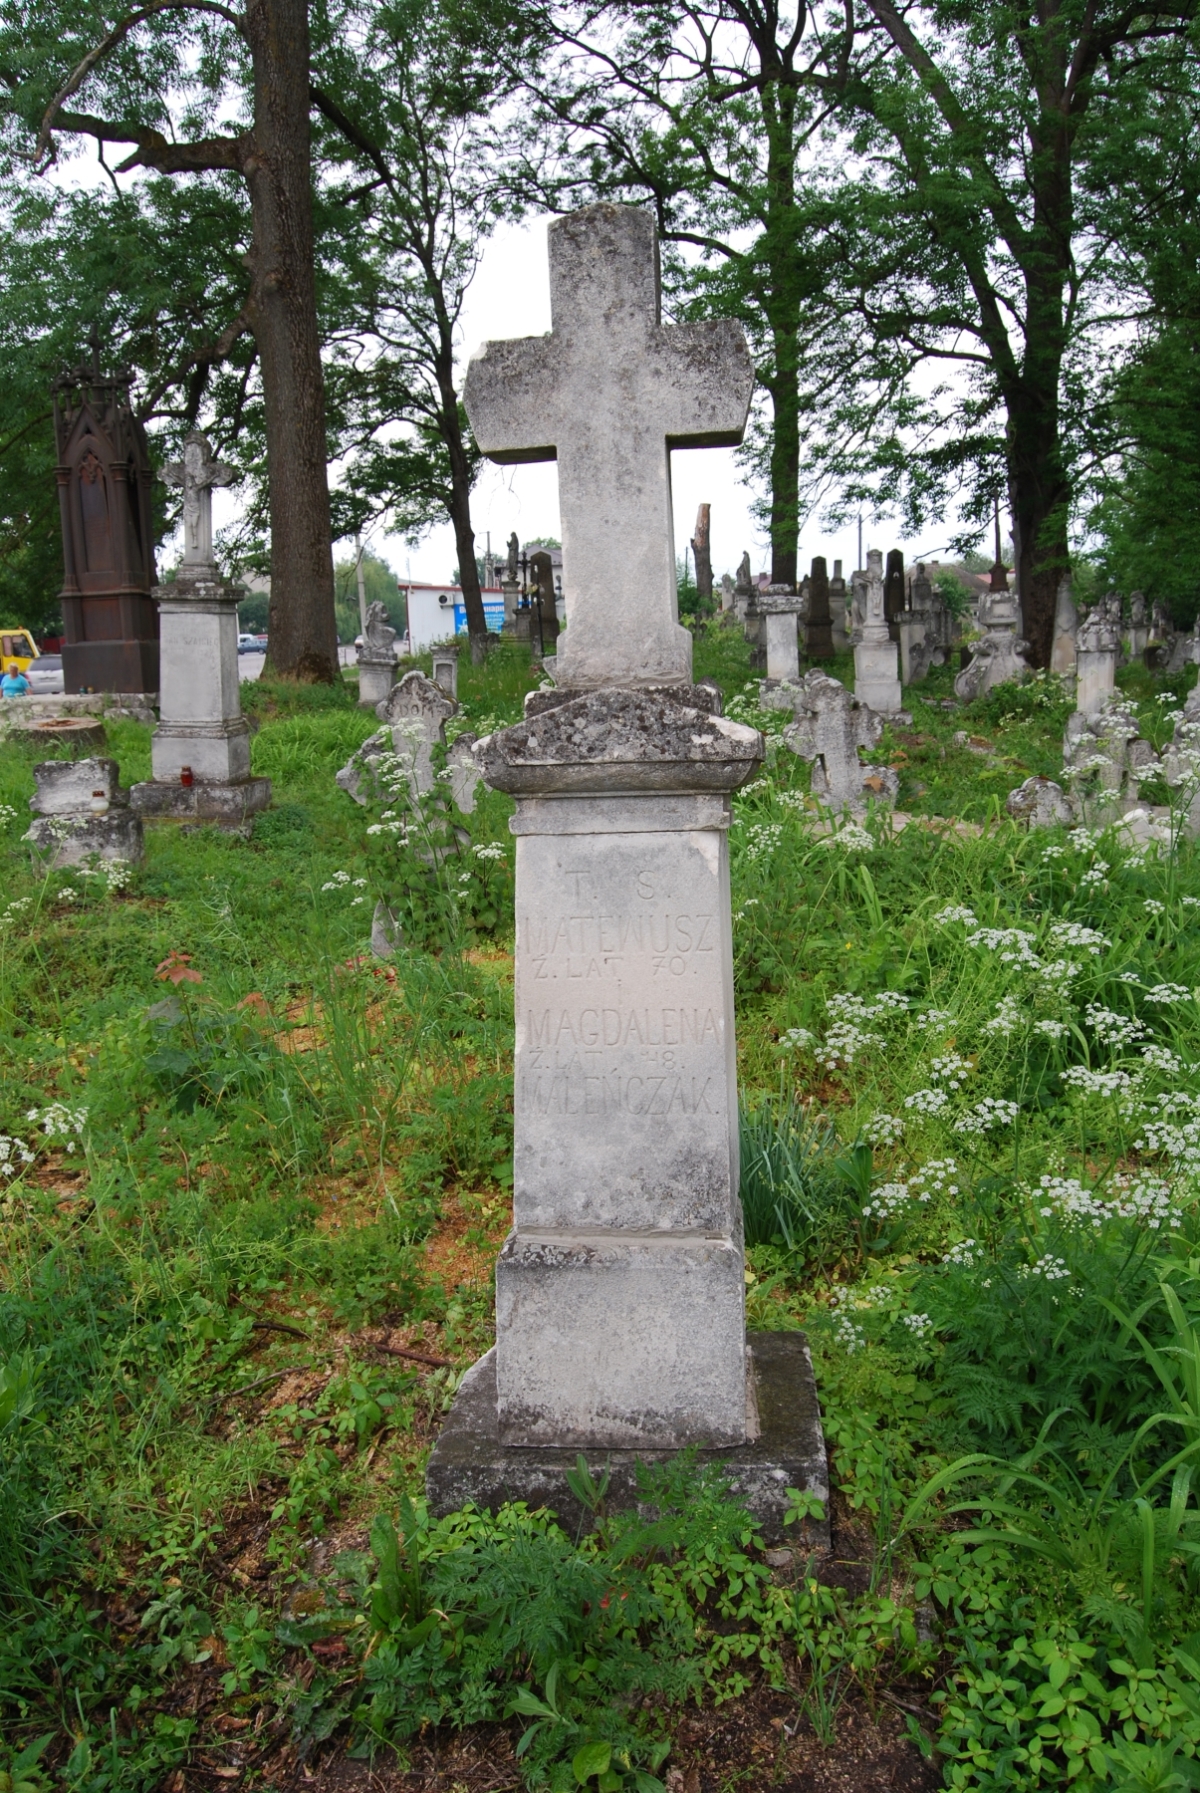 Tombstone of Matthew and Magdalena Malenczak, Zbarazh cemetery, state of 2018